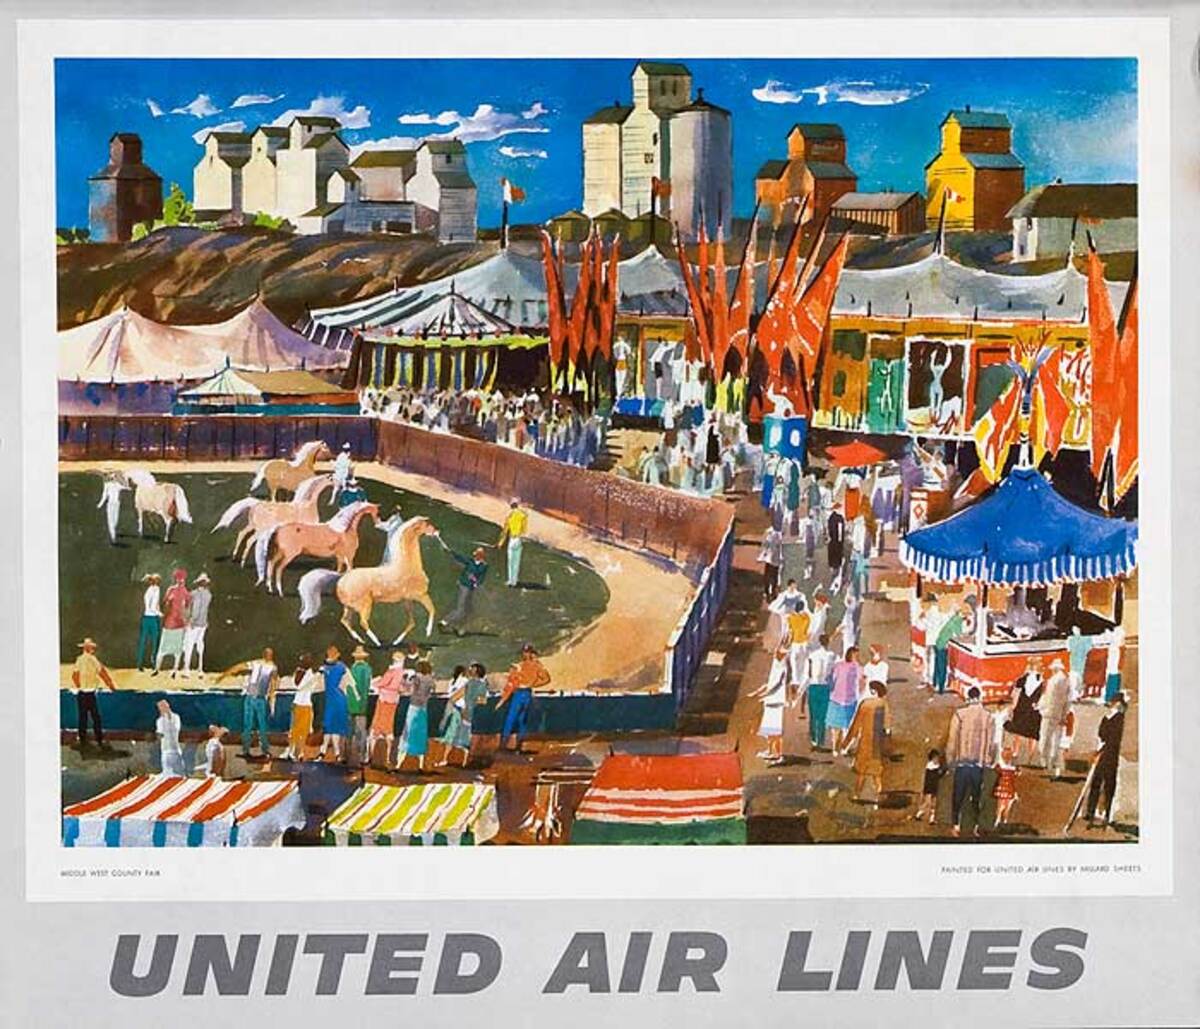 United Airlines Original Small Sized Poster County Fair